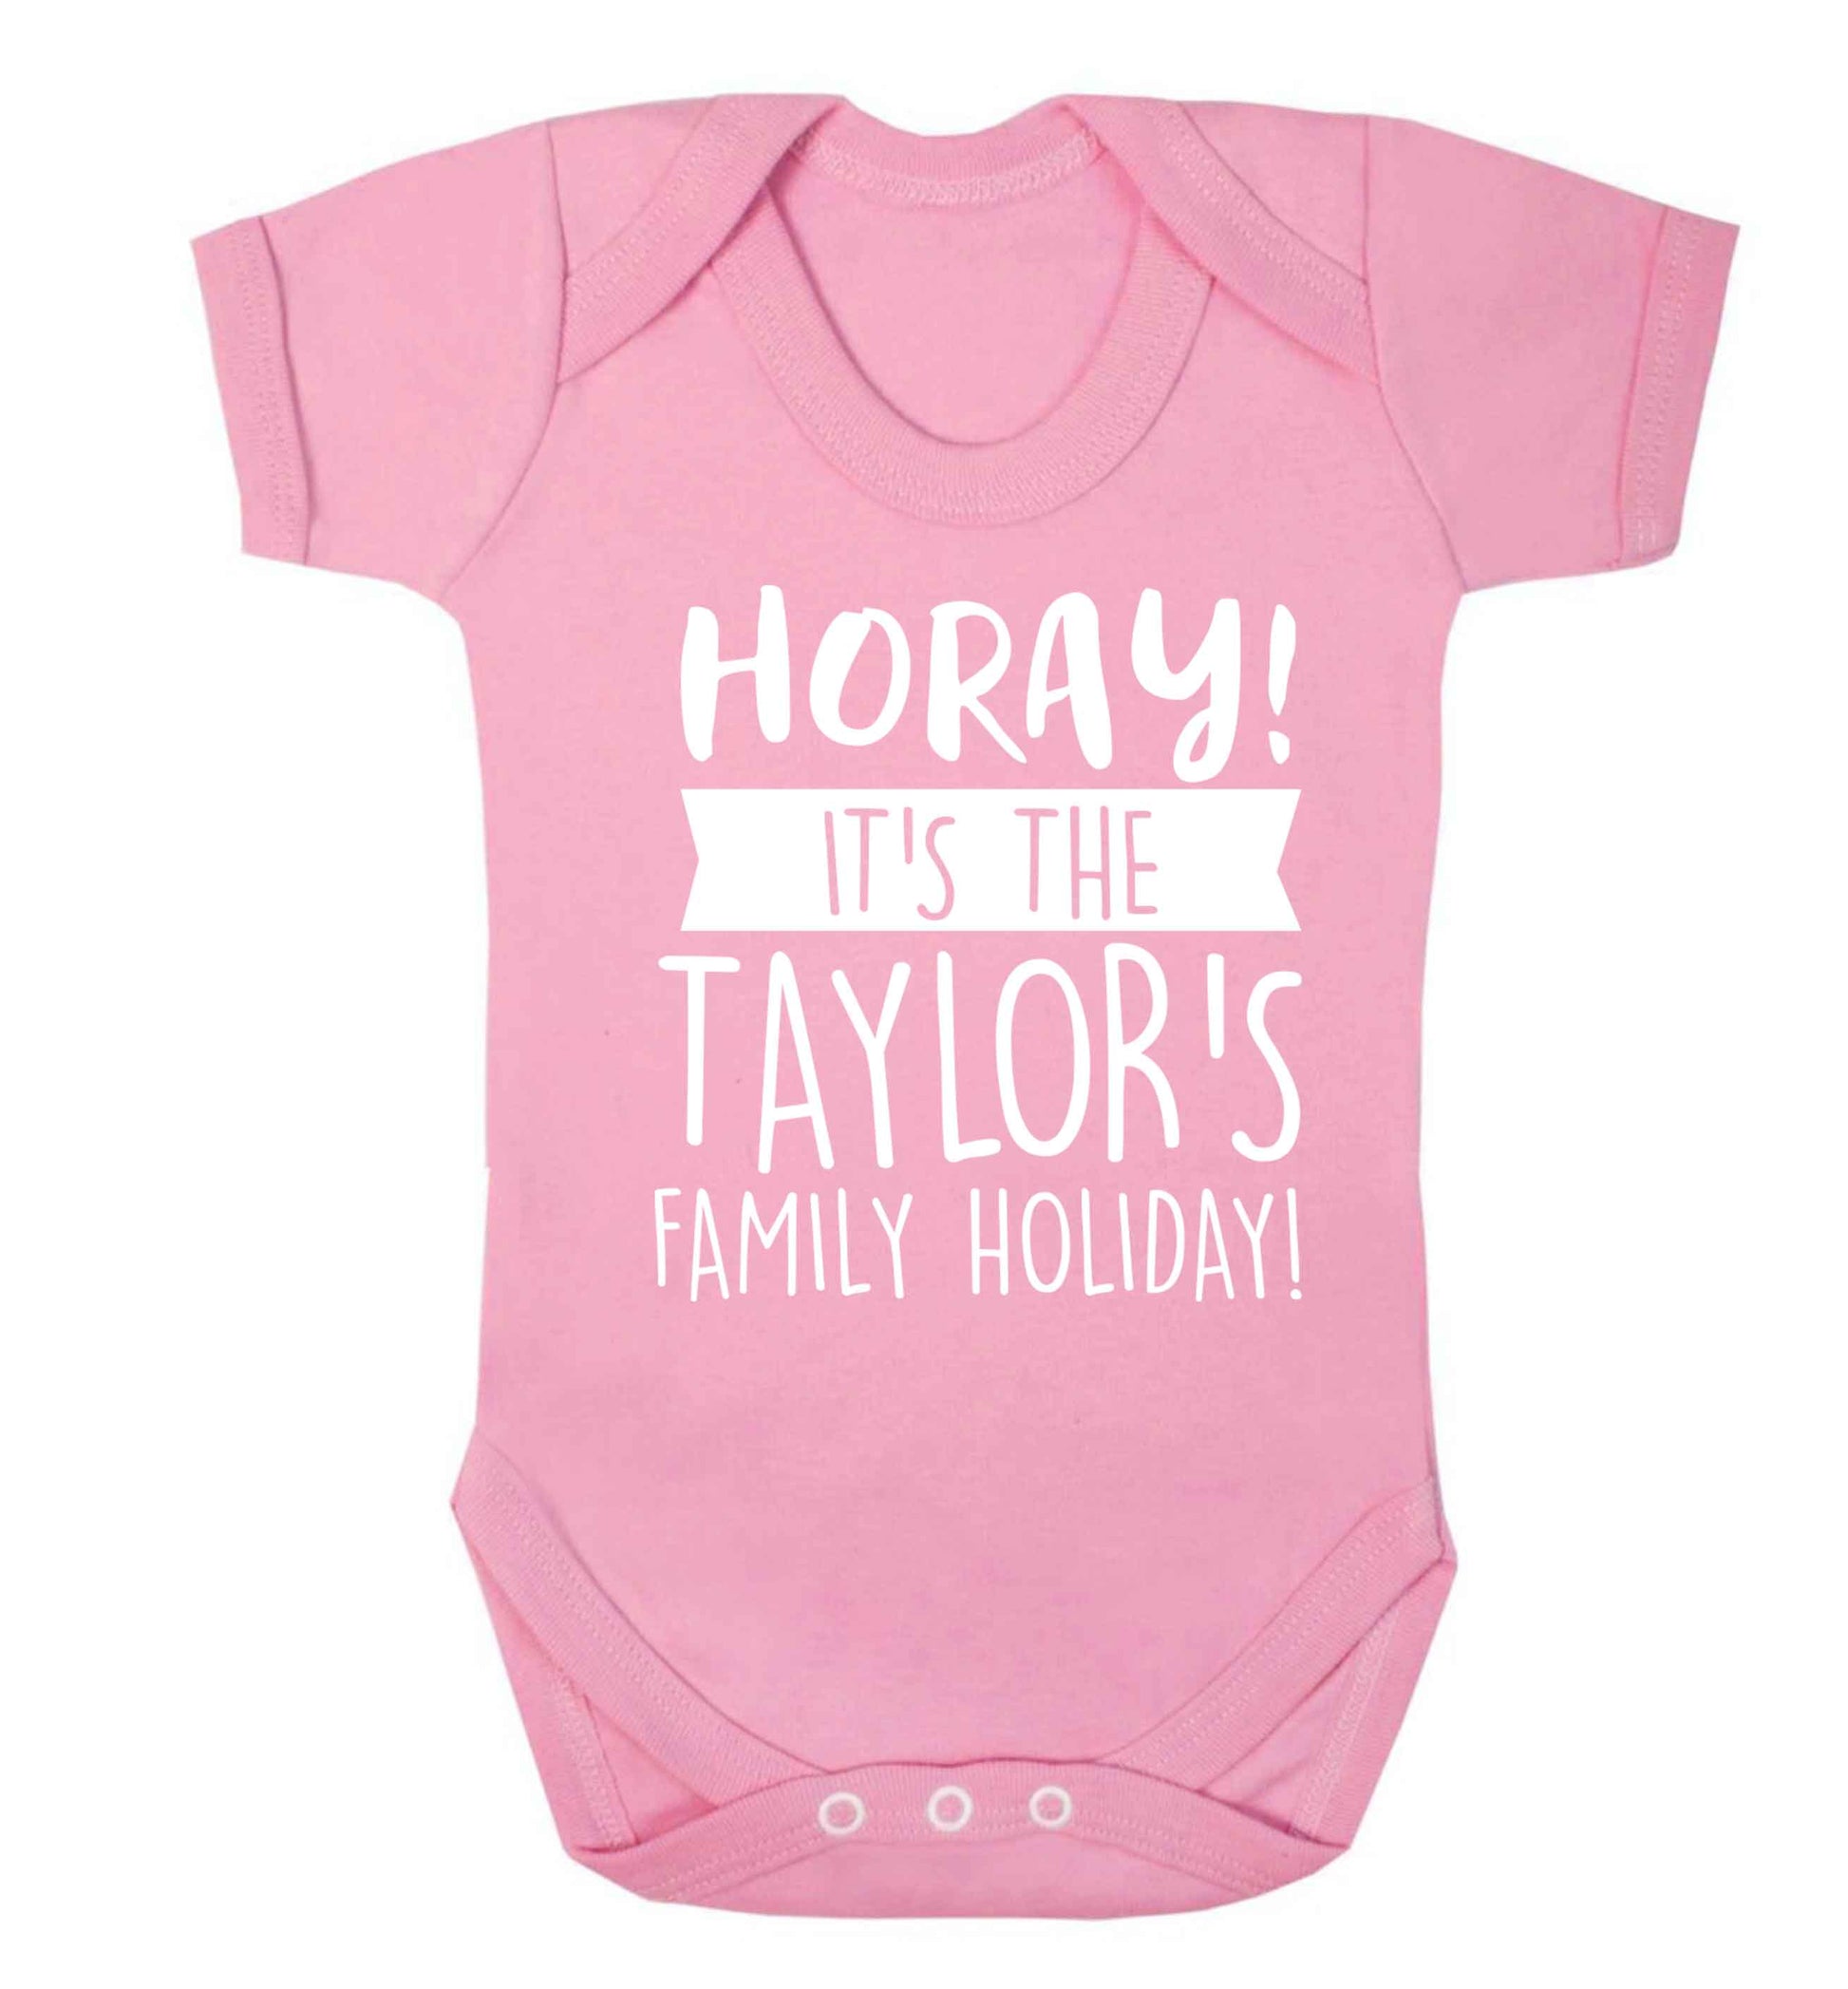 Horay it's the Taylor's family holiday! personalised item Baby Vest pale pink 18-24 months